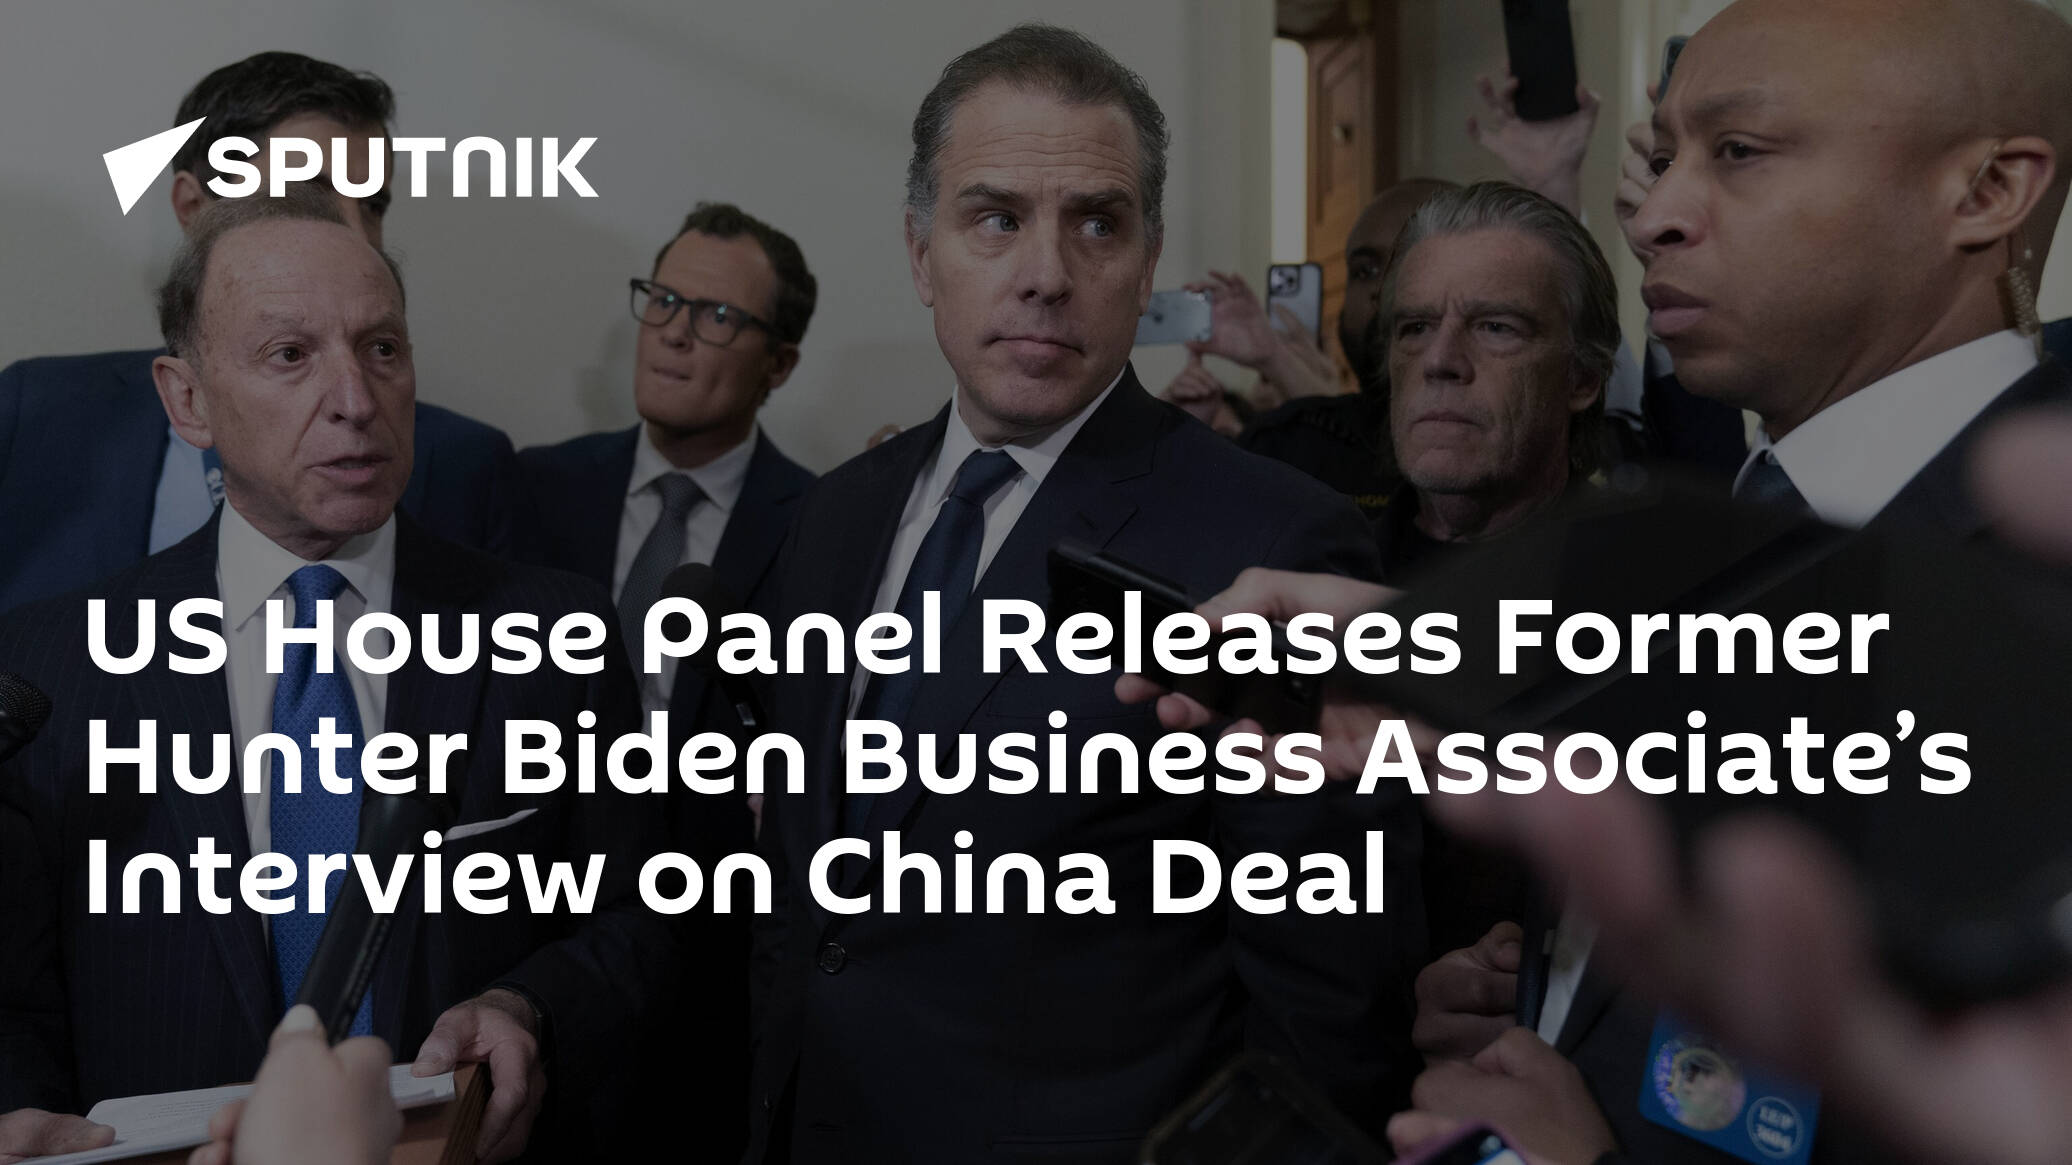 US House Panel Releases Former Hunter Biden Business Associate’s Interview on China Deal